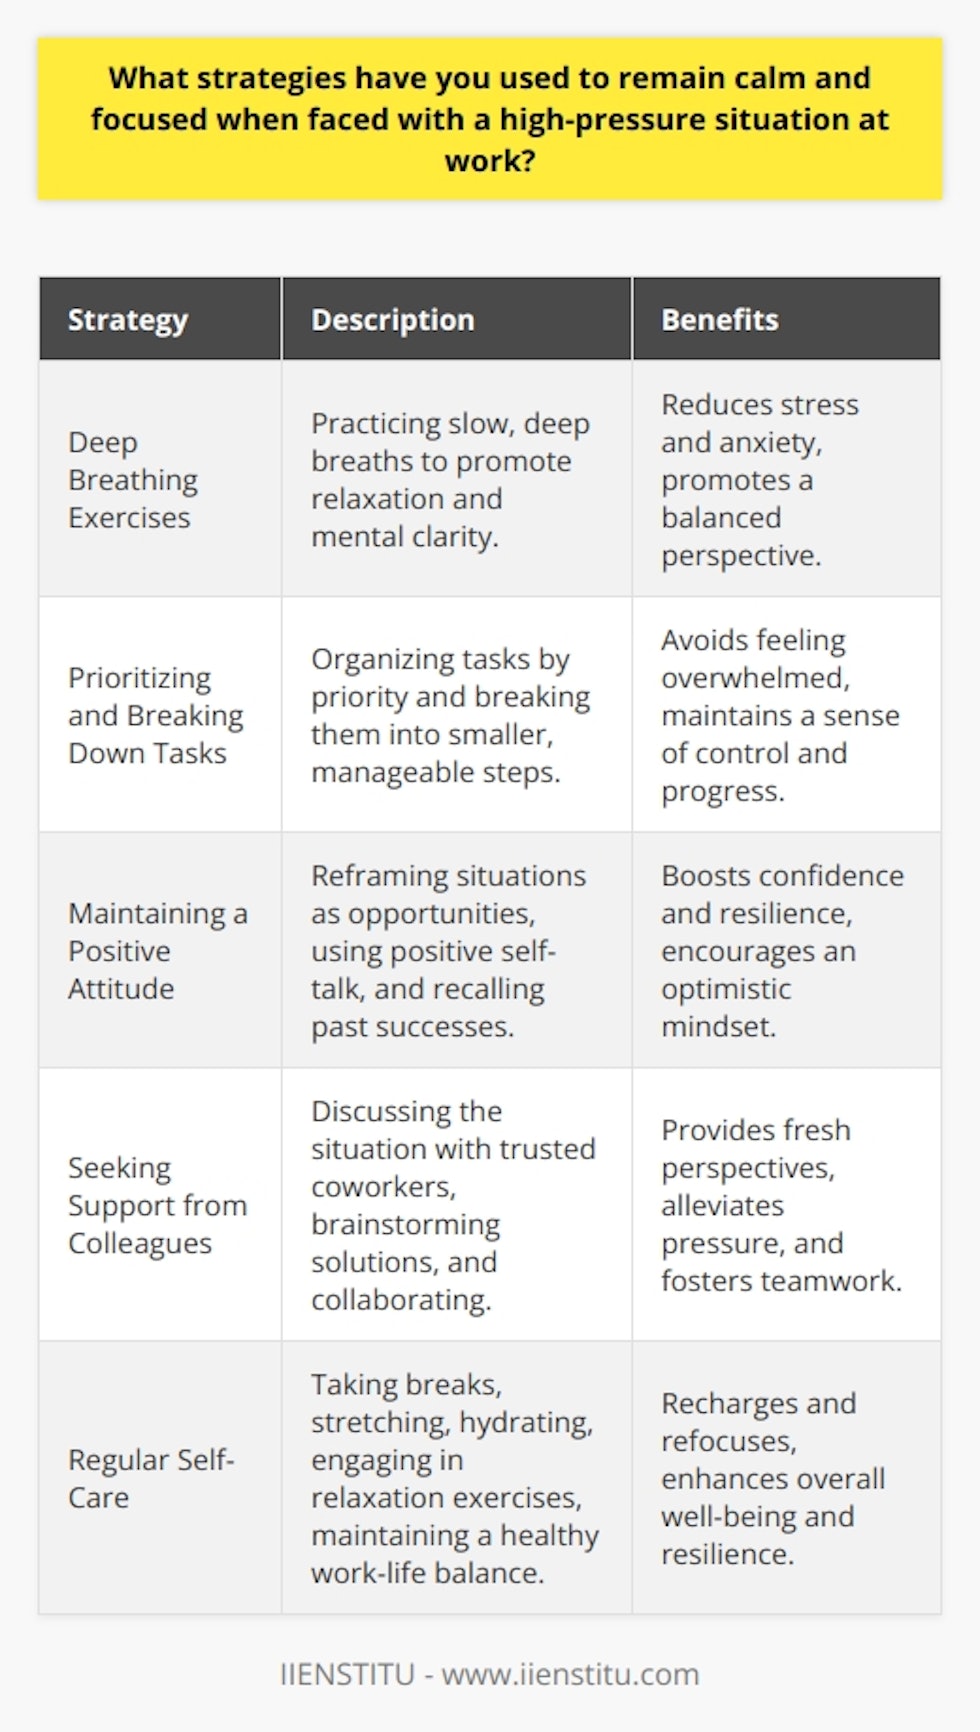 Several strategies can be employed to maintain composure and focus in high-pressure work situations. One effective approach is to practice deep breathing exercises, which can help reduce stress and anxiety levels. Taking slow, deep breaths can promote relaxation and mental clarity, enabling you to tackle challenges with a more balanced perspective. Prioritizing Tasks and Breaking Them Down Another useful strategy is to prioritize tasks and break them down into smaller, manageable steps. This approach can help you avoid feeling overwhelmed by the magnitude of the situation. By focusing on one task at a time and setting achievable goals, you can maintain a sense of control and progress, even under pressure. Maintaining a Positive Attitude Maintaining a positive attitude is crucial in high-pressure situations. Reframing the situation as an opportunity for growth and learning can help you approach it with a more optimistic mindset. Encouraging yourself with positive self-talk and reminding yourself of past successes can boost your confidence and resilience. Seeking Support from Colleagues Seeking support from colleagues can also be beneficial. Discussing the situation with a trusted coworker can provide a fresh perspective and help you brainstorm solutions. Collaborating with others can also alleviate some of the pressure and foster a sense of teamwork and shared responsibility. Engaging in Regular Self-Care Engaging in regular self-care practices is essential for maintaining overall well-being and resilience. Taking short breaks throughout the day to stretch, hydrate, or engage in a brief relaxation exercise can help you recharge and refocus. Prioritizing a healthy work-life balance, including getting enough sleep, eating well, and engaging in enjoyable activities outside of work, can also contribute to your ability to handle high-pressure situations more effectively. By implementing these strategies and developing a toolkit of stress-management techniques, you can enhance your ability to remain calm and focused when faced with high-pressure situations at work. Remember that building resilience is an ongoing process, and its important to be patient and kind to yourself as you navigate challenging circumstances.